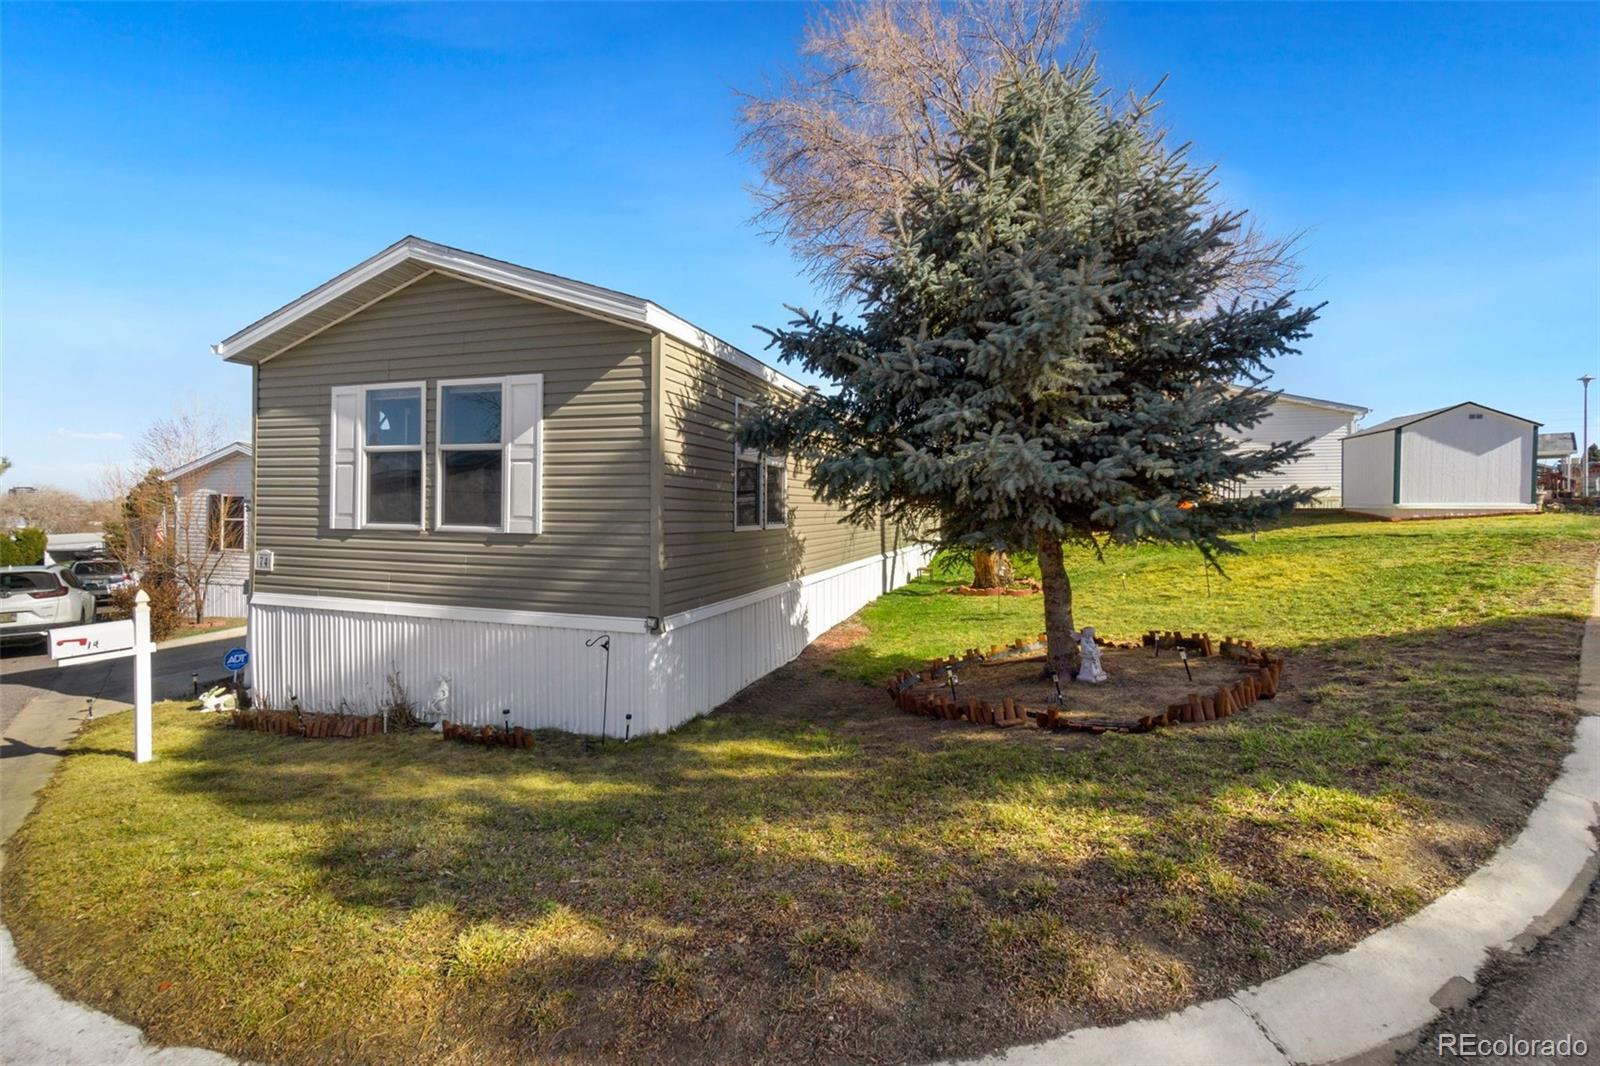 1801 W 92 nd Avenue, Federal Heights, CO 80260 - MLS#: 3630681